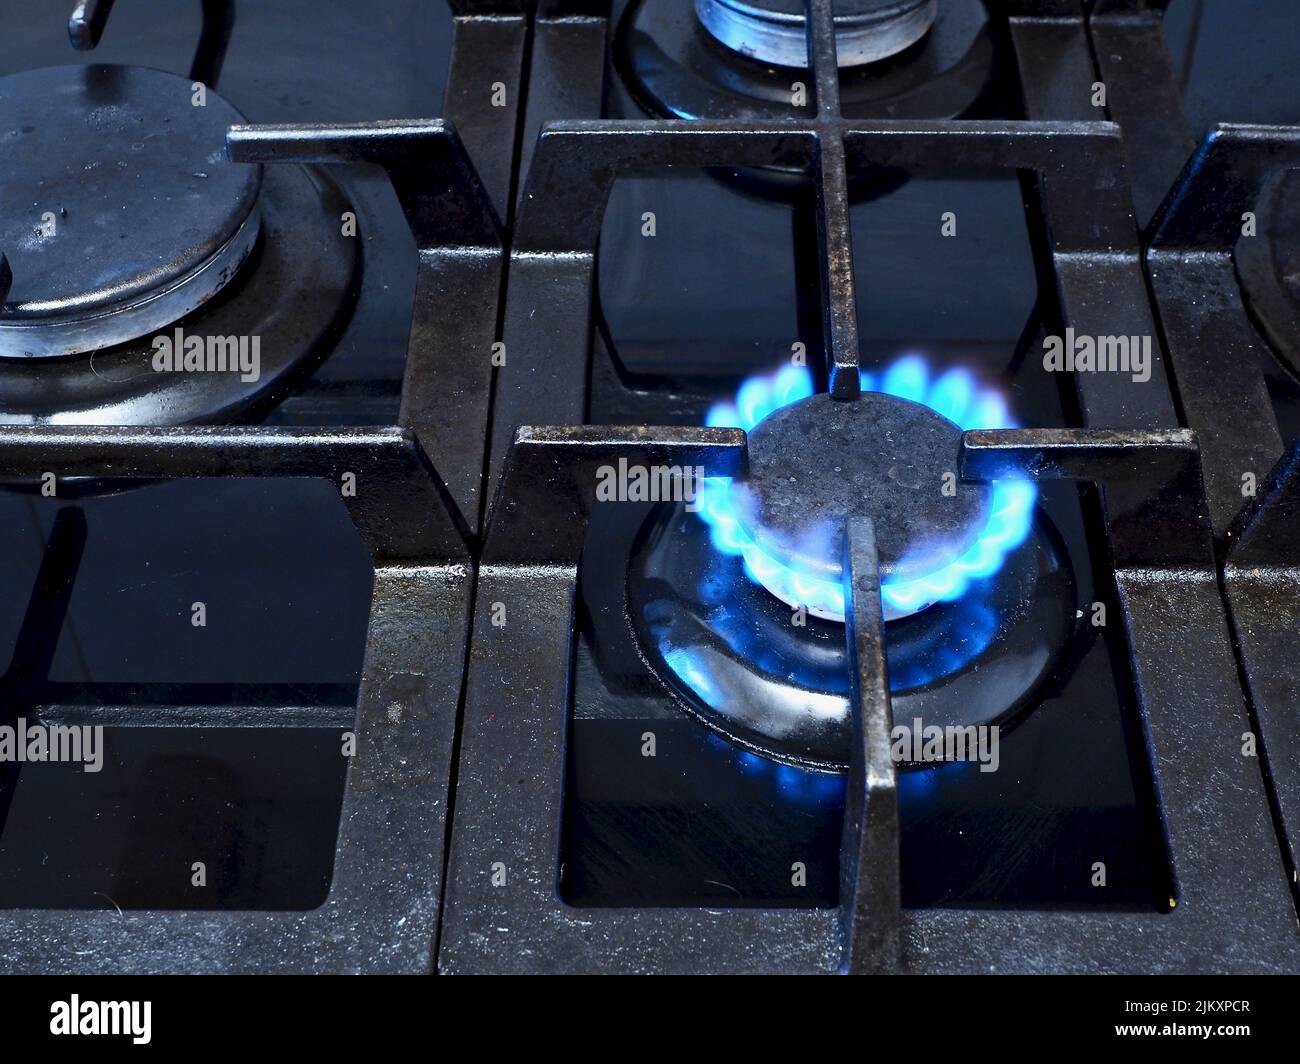 gas hob viewed from above on a domestic kitchen stove Stock Photo